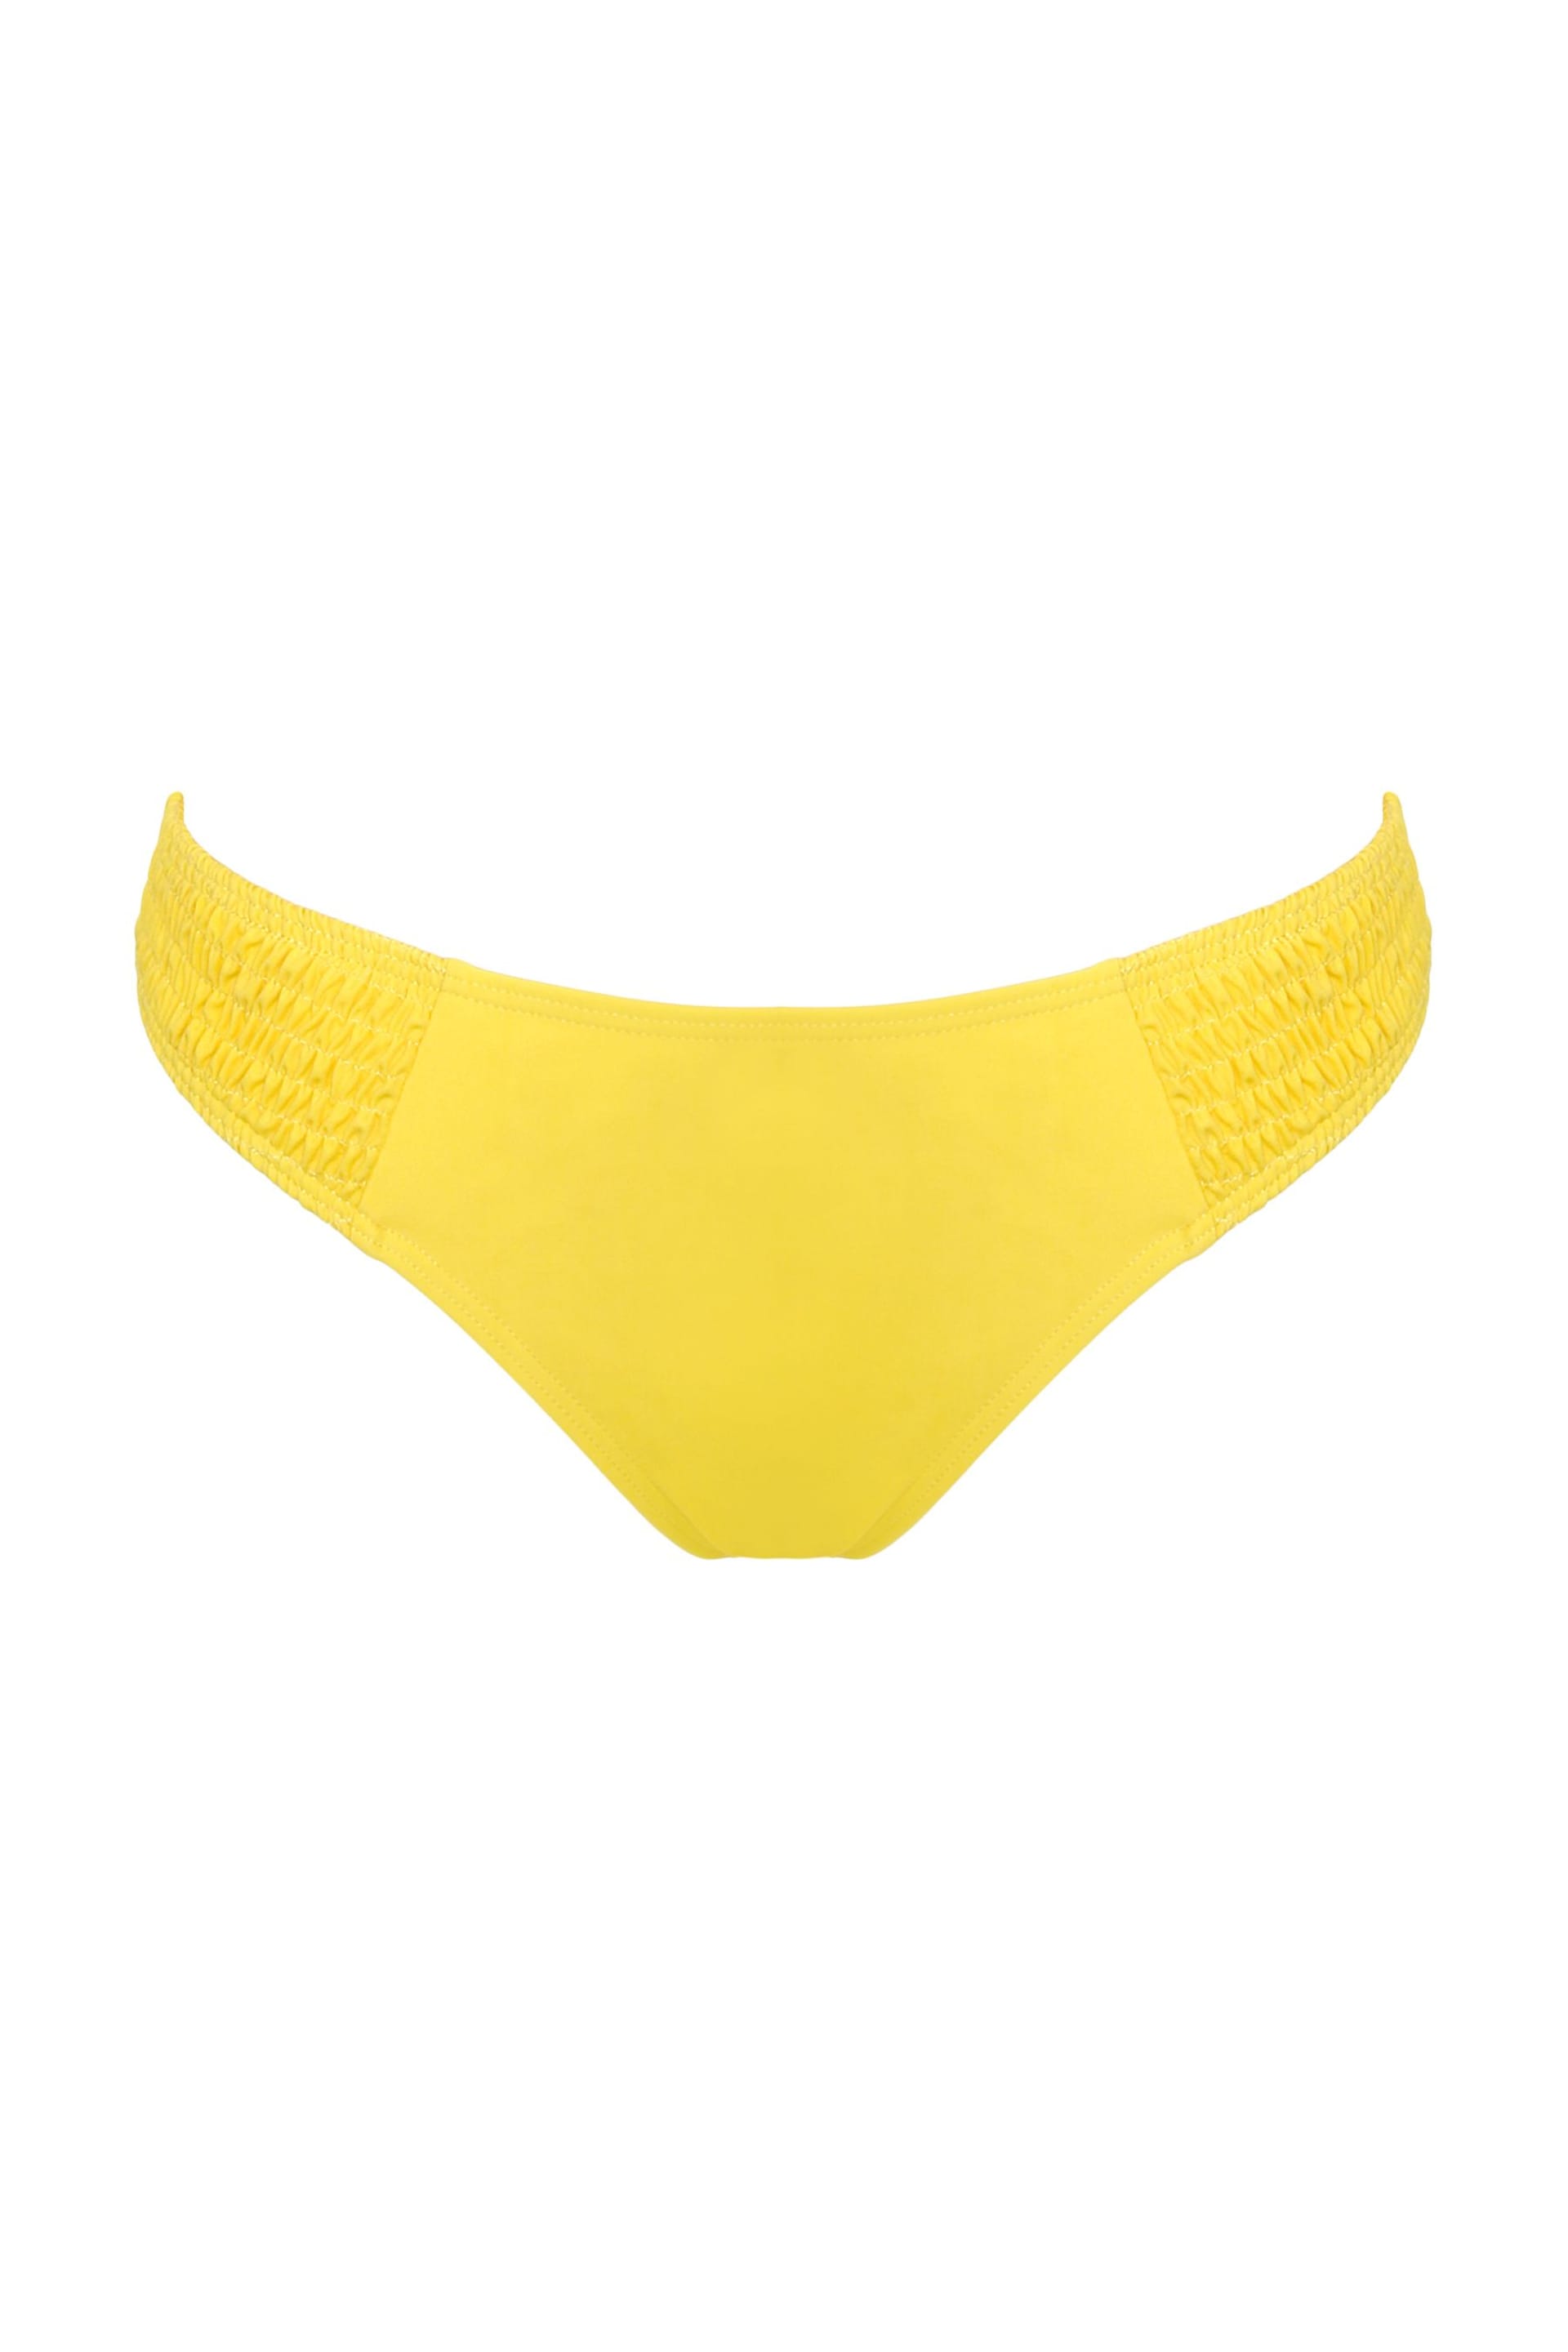 Pour Moi Yellow Gold Coast Briefs - Image 4 of 5